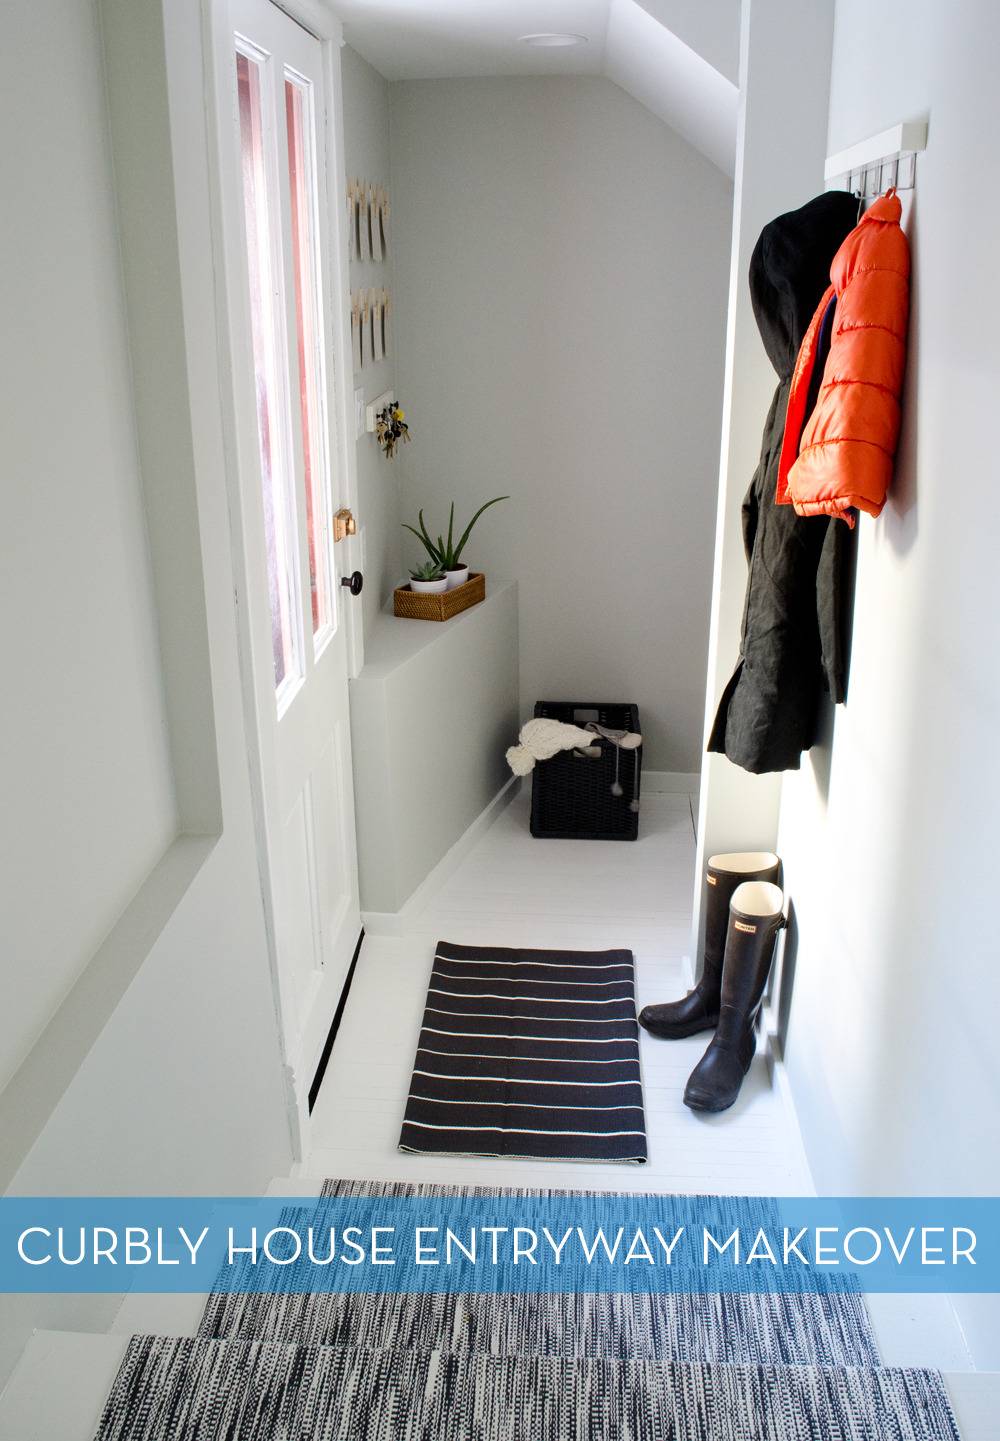 Curbly House entryway makeover project - new floors, stairs and a fresh coat of paint make this dingy hallway a bright welcoming space.